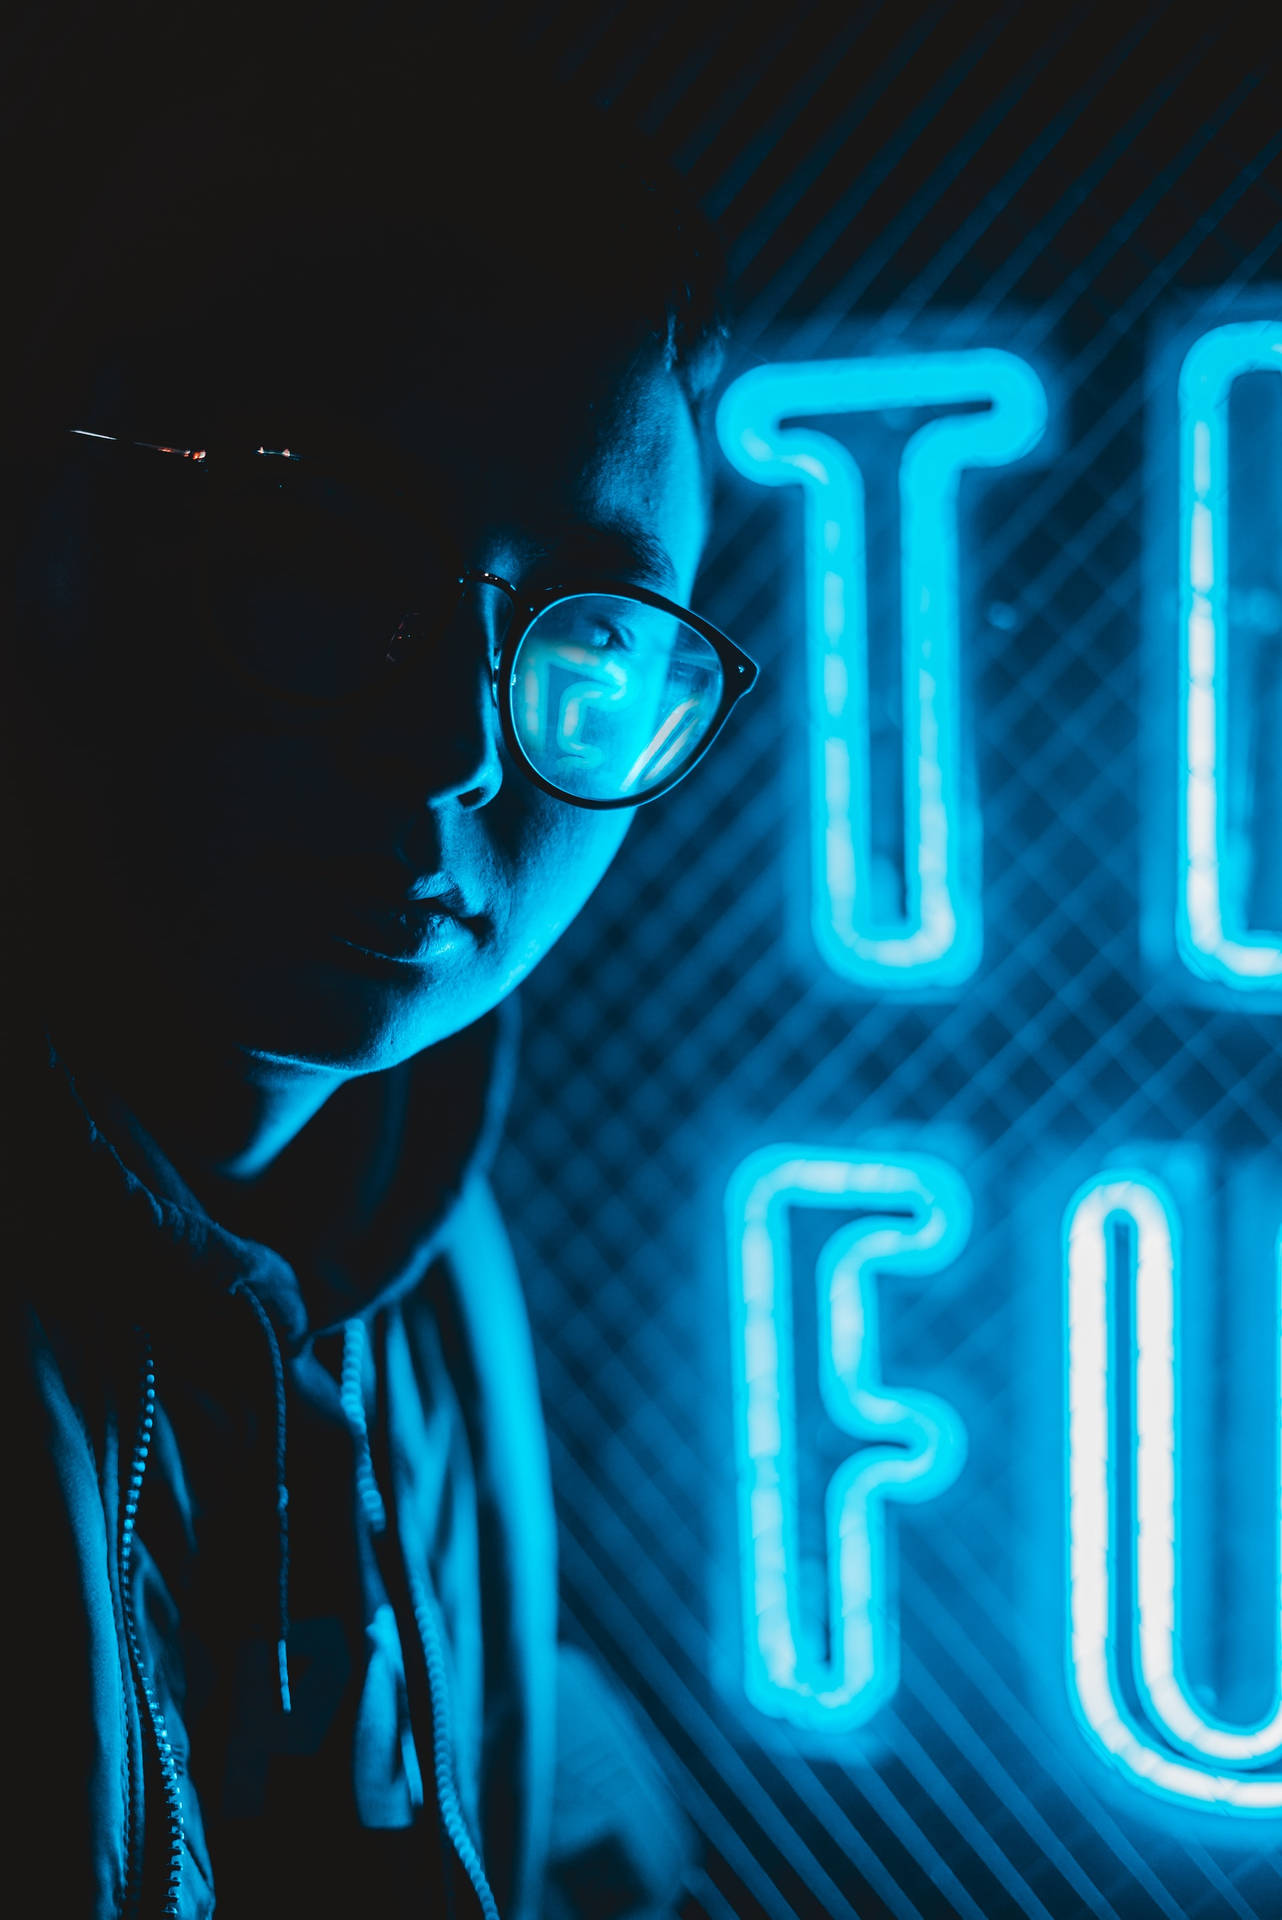 Man With Eyeglasses In Neon Blue Iphone Wallpaper